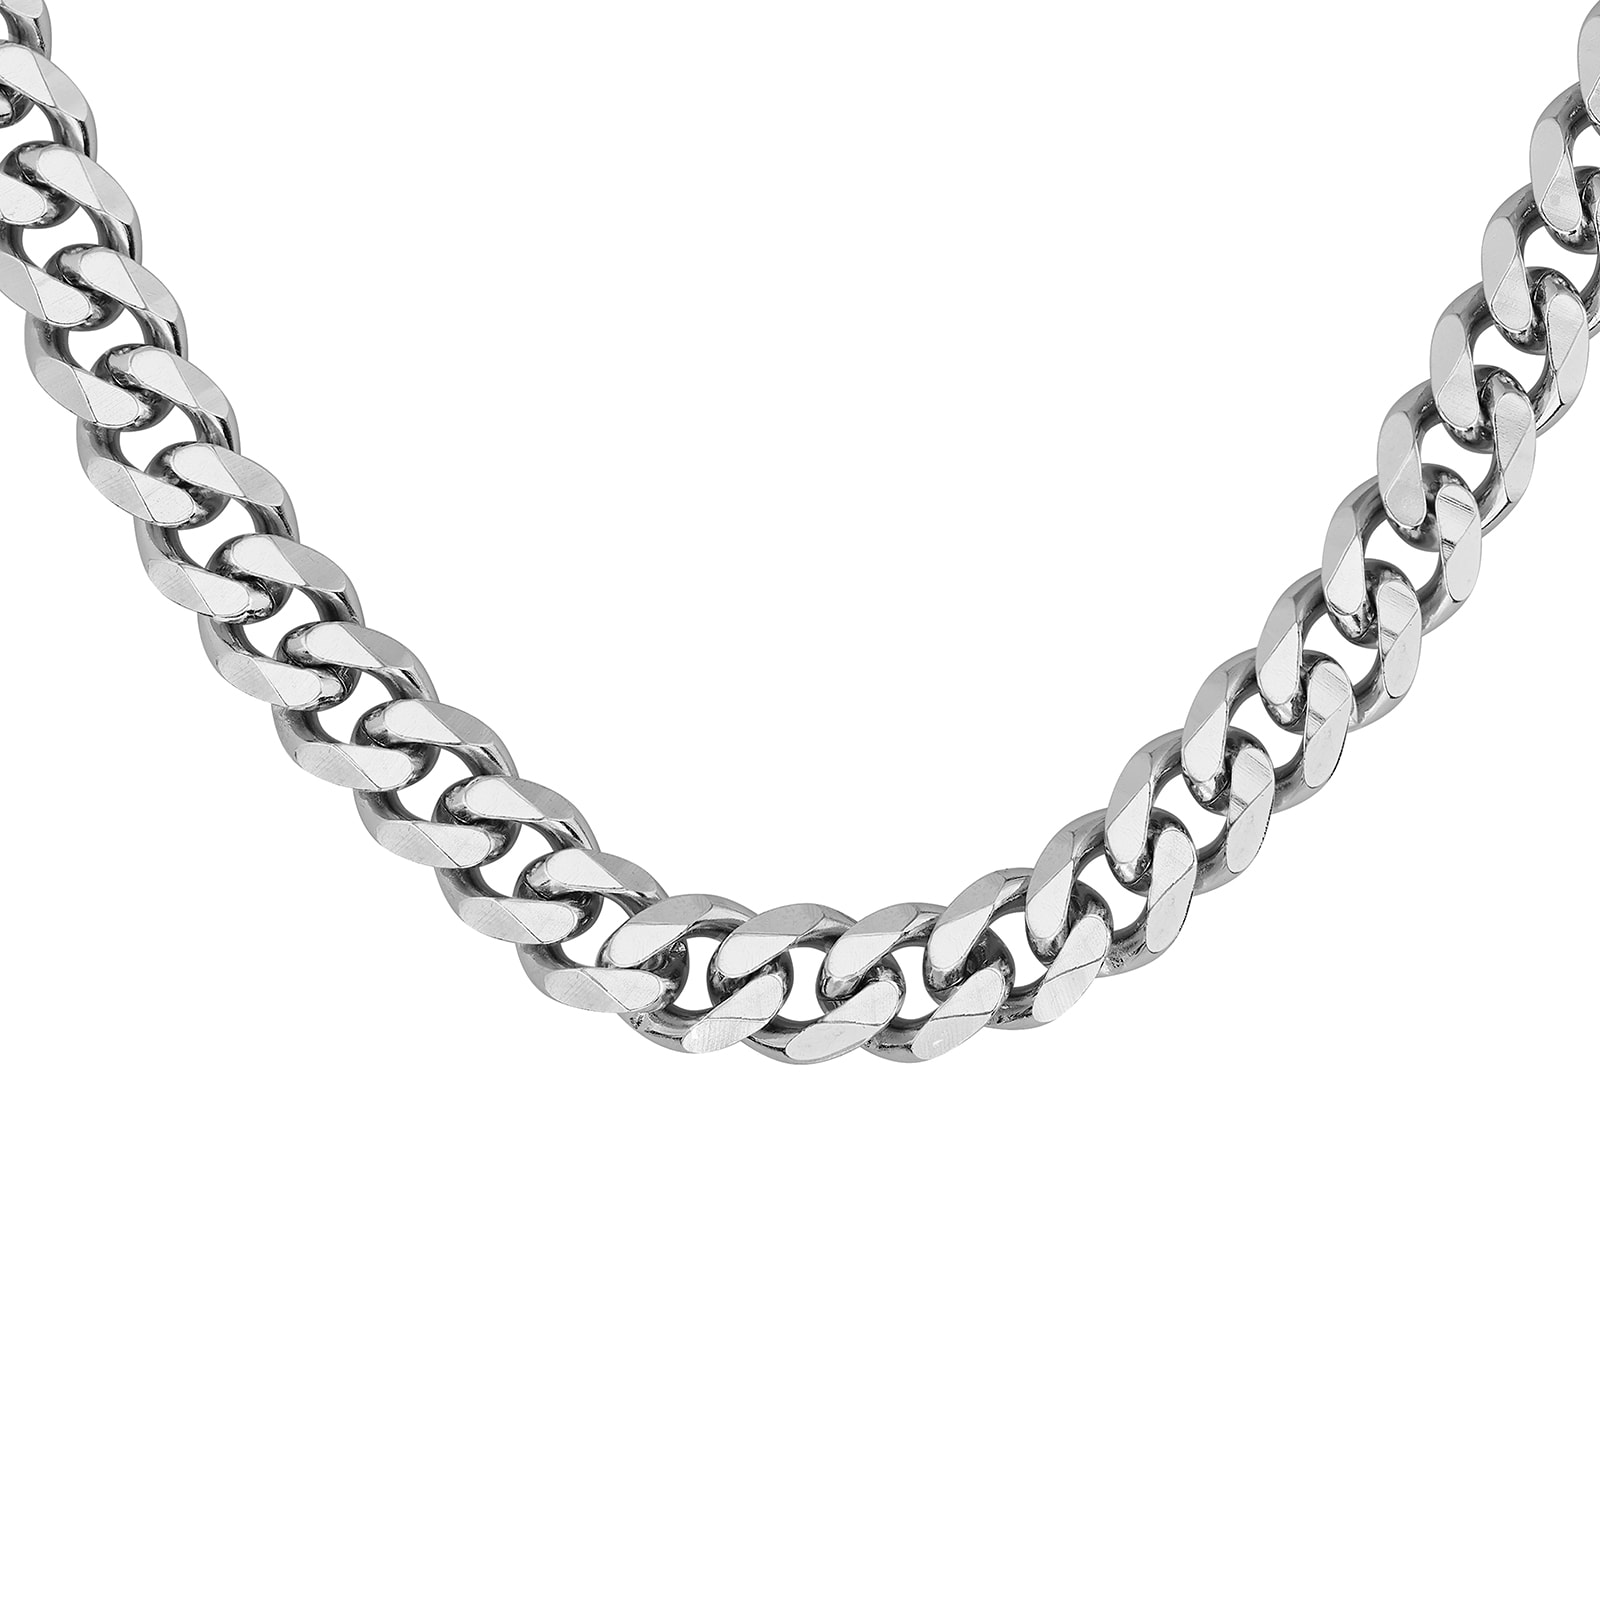 BOSS Stainless Steel Chain Link Necklace 1580142